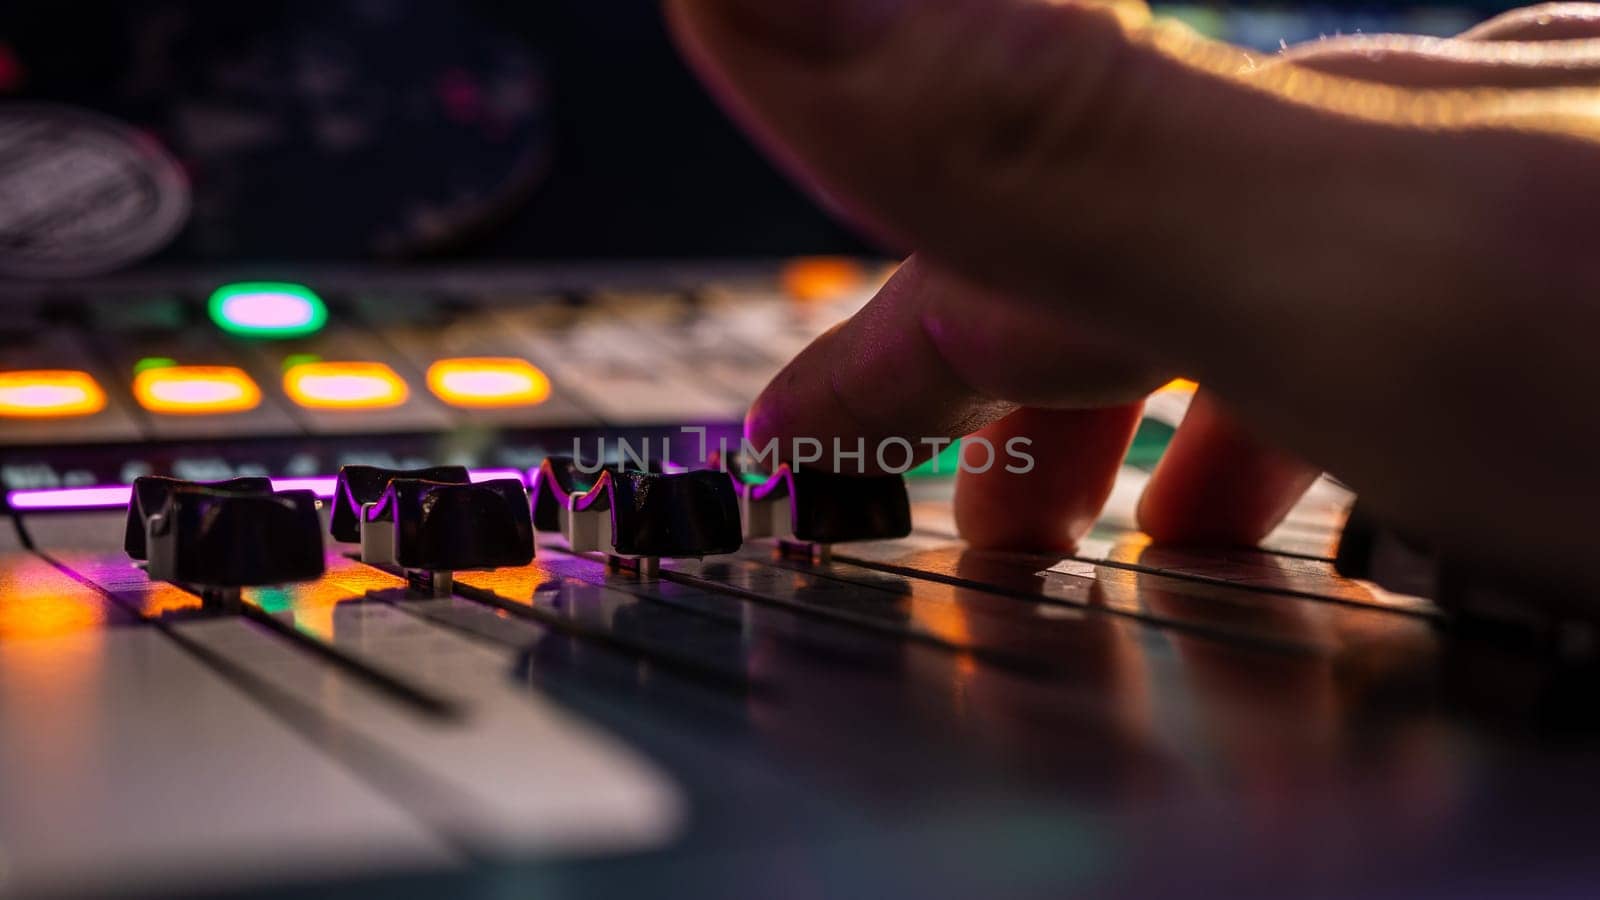 Sound engineer works with sound mixer, hands close-up